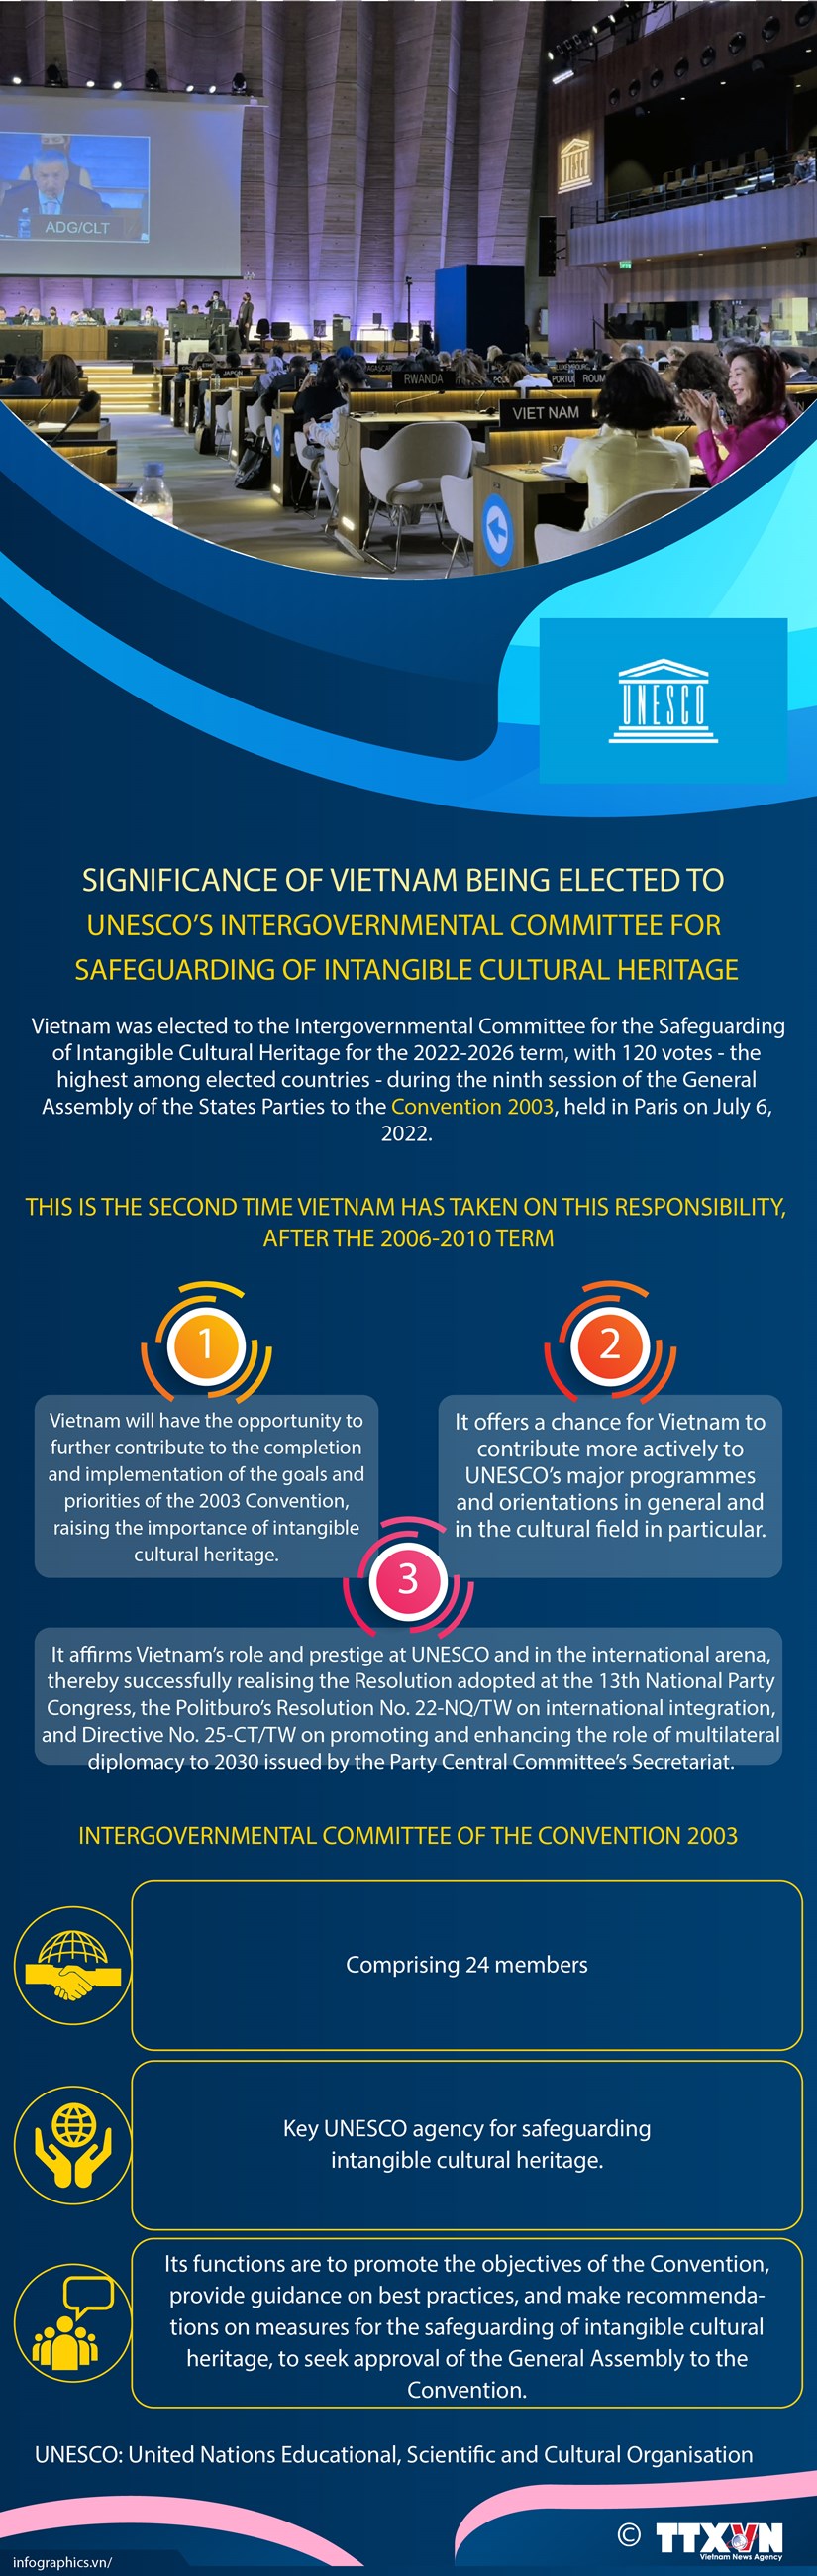 Significance of Vietnam being elected to UNESCO intangible cultural heritage committee hinh anh 1